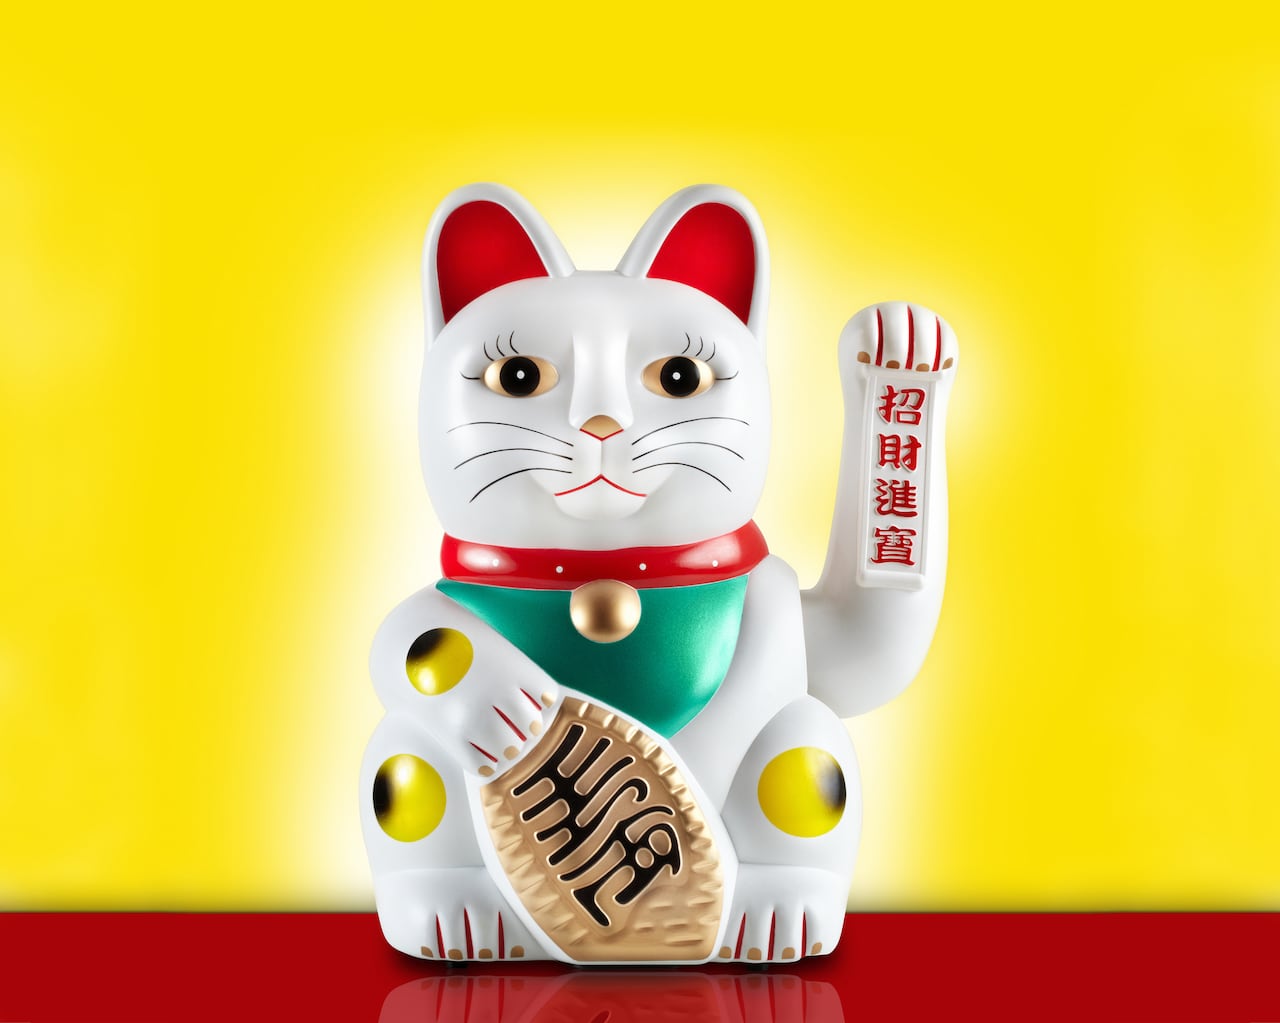 Studio photograph of the statuette known as Lucky Cat or Maneki-neko. This is a Japanese icon that typically represents good luck, and is also known as  Welcoming Cat, Money Cat, or Fortune Cat. The Lucky Cat is often thought to be Chinese since it is often sold through Chinese retailers.